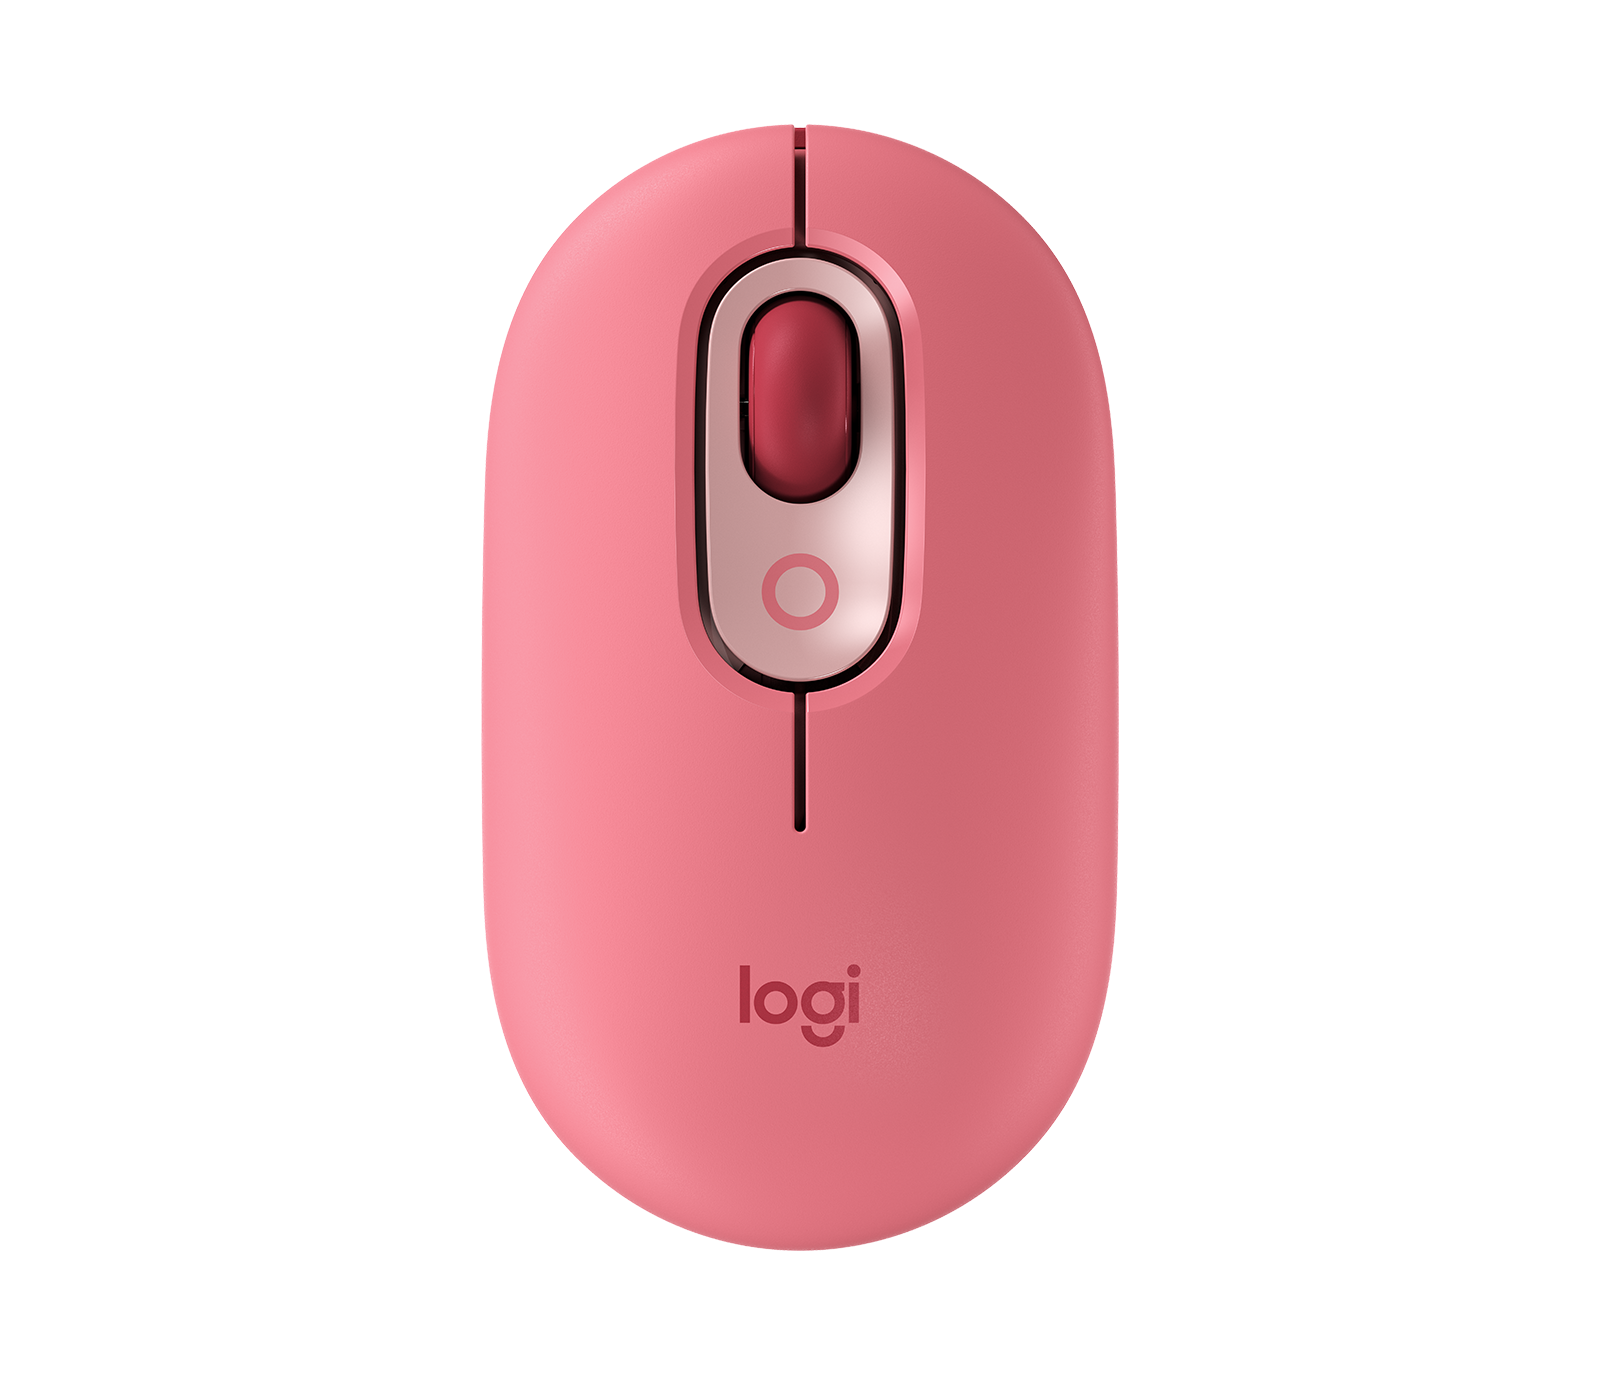 Connecting your Logitech POP Mouse to a PC via Bluetooth